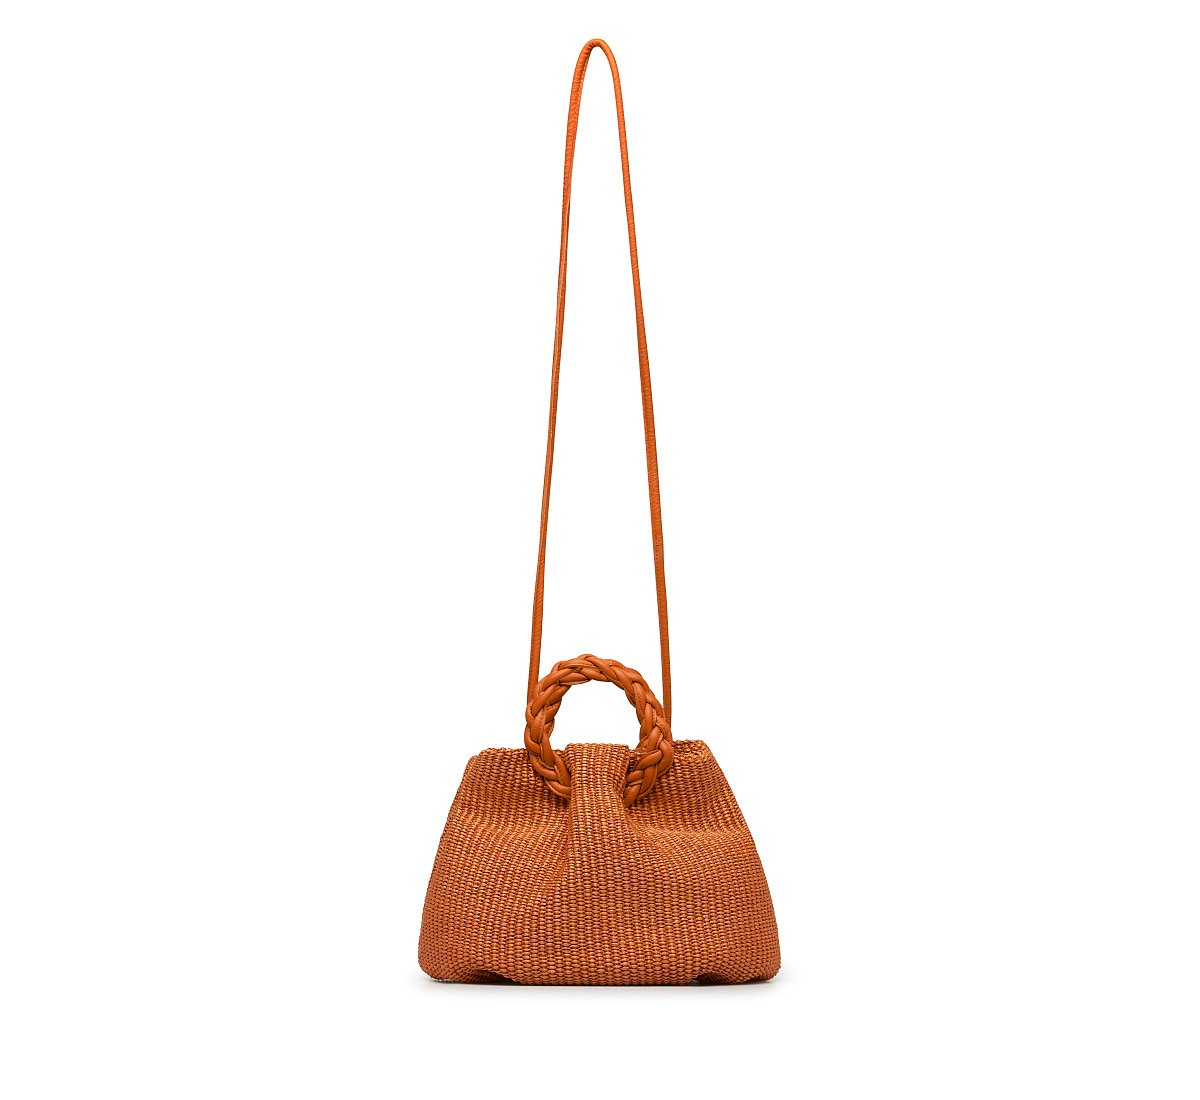 Rafia bag with leather details